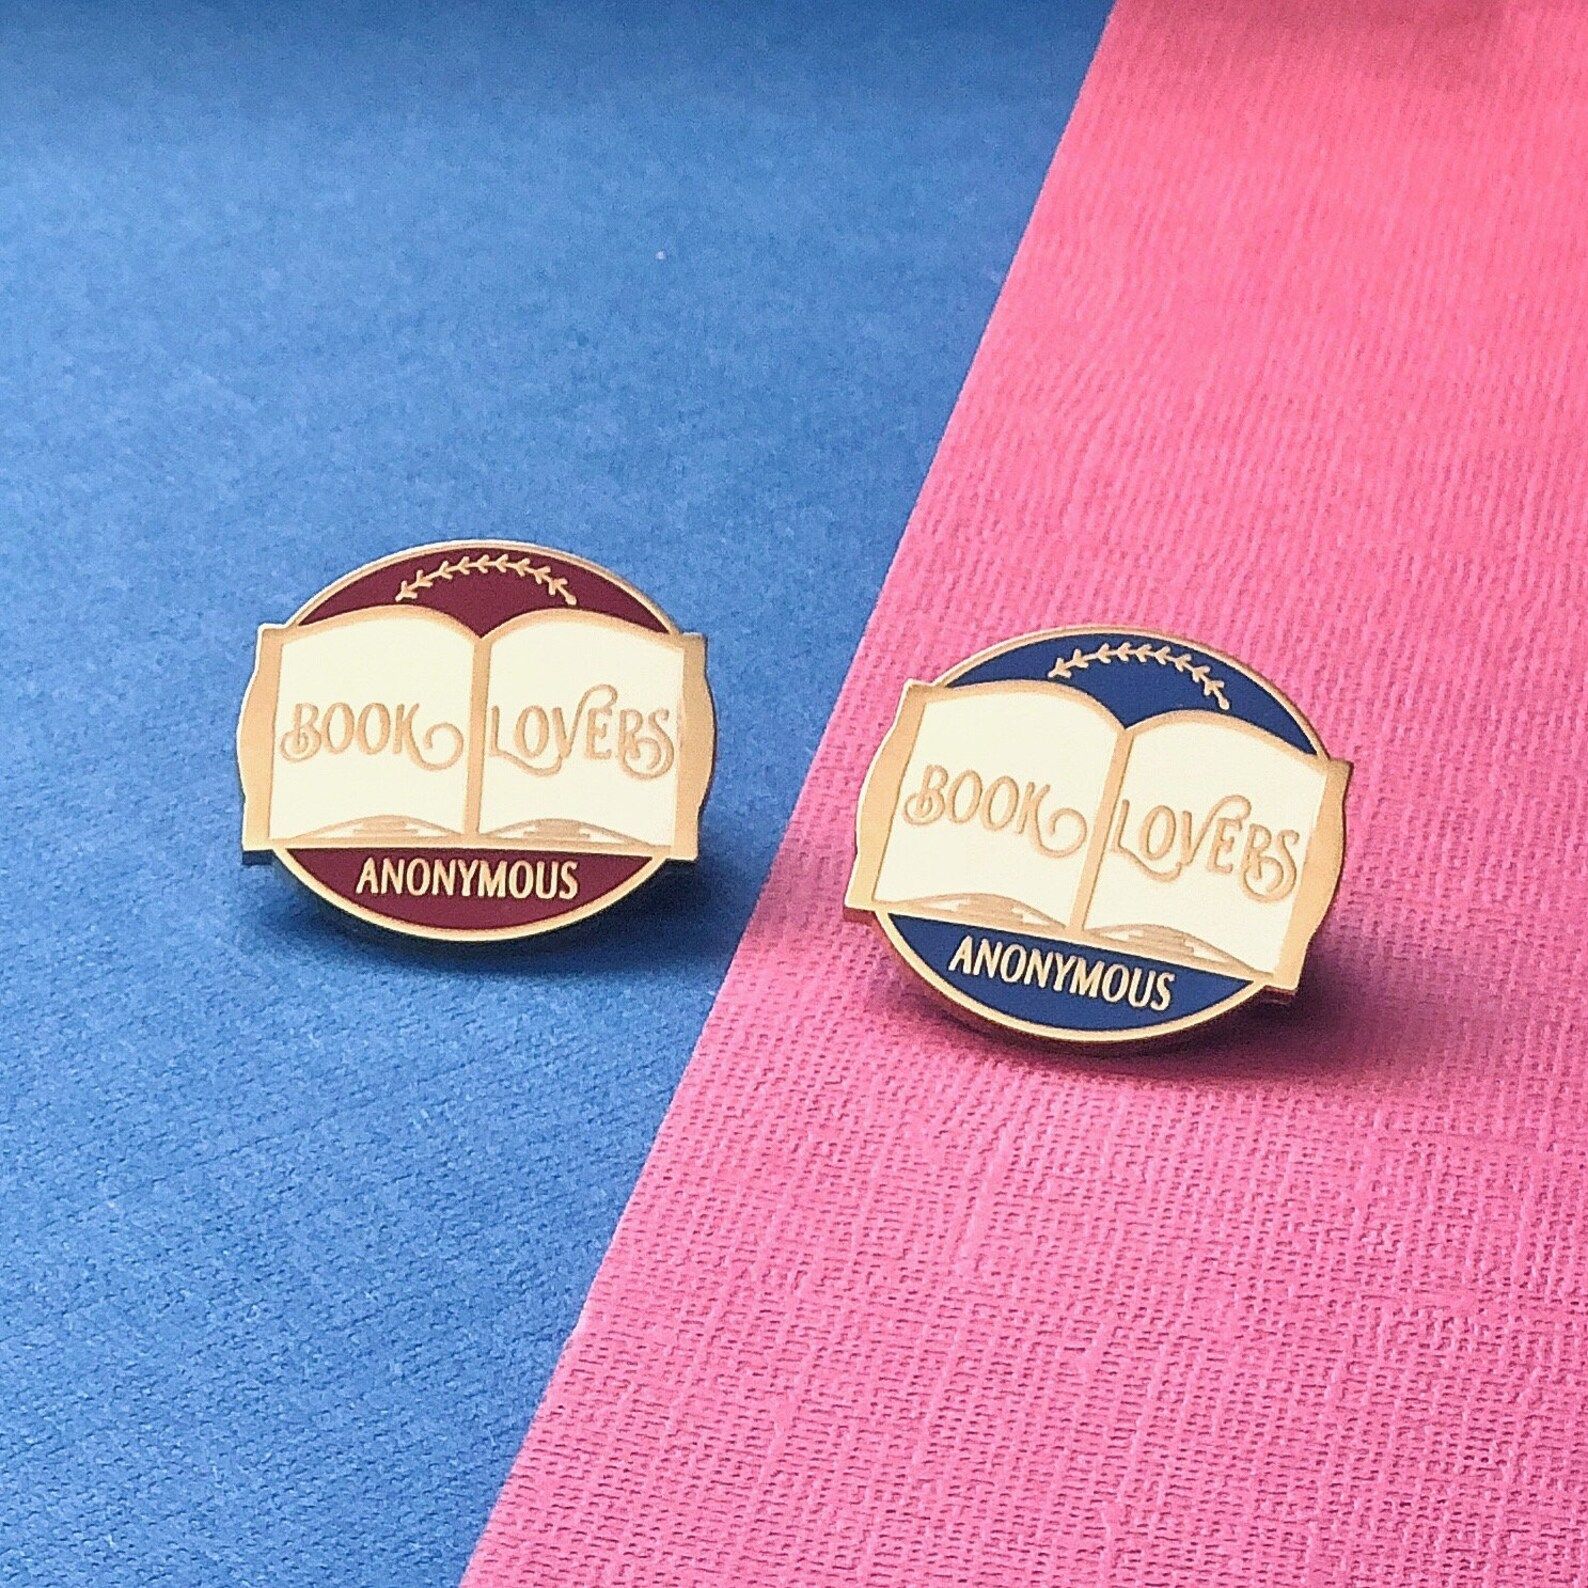 enamel pins featuring an open book that read "book lovers anonymous"